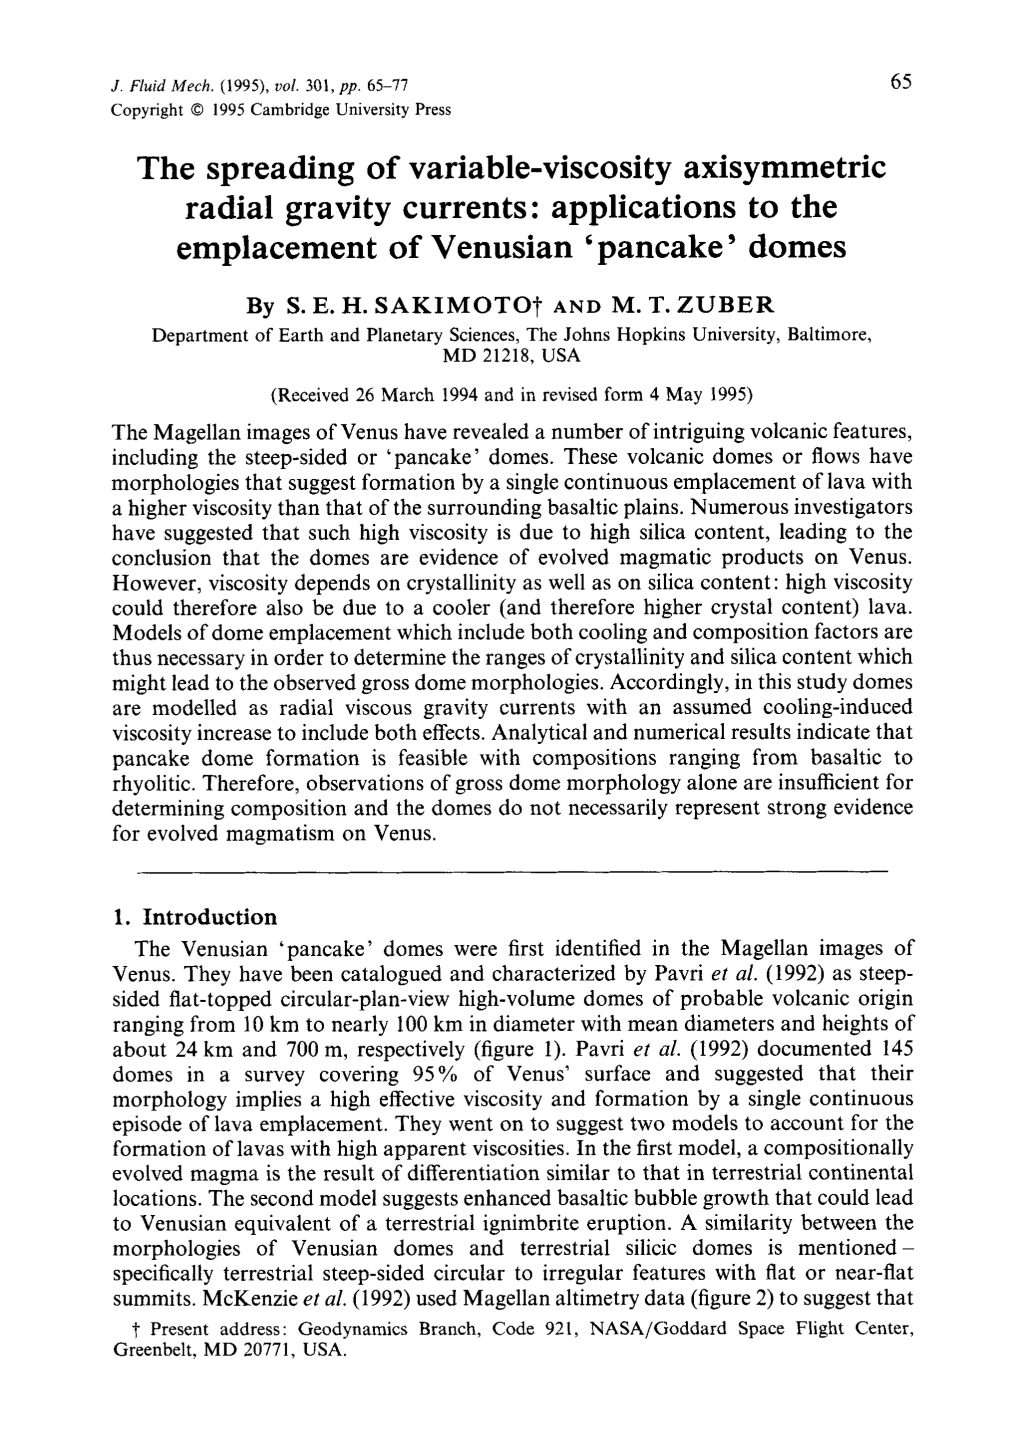 The Spreading of Variable-Viscosity Axisymmetric Radial Gravity Currents : Applications to the Emplacement of Venusian ‘Pancake ’ Domes